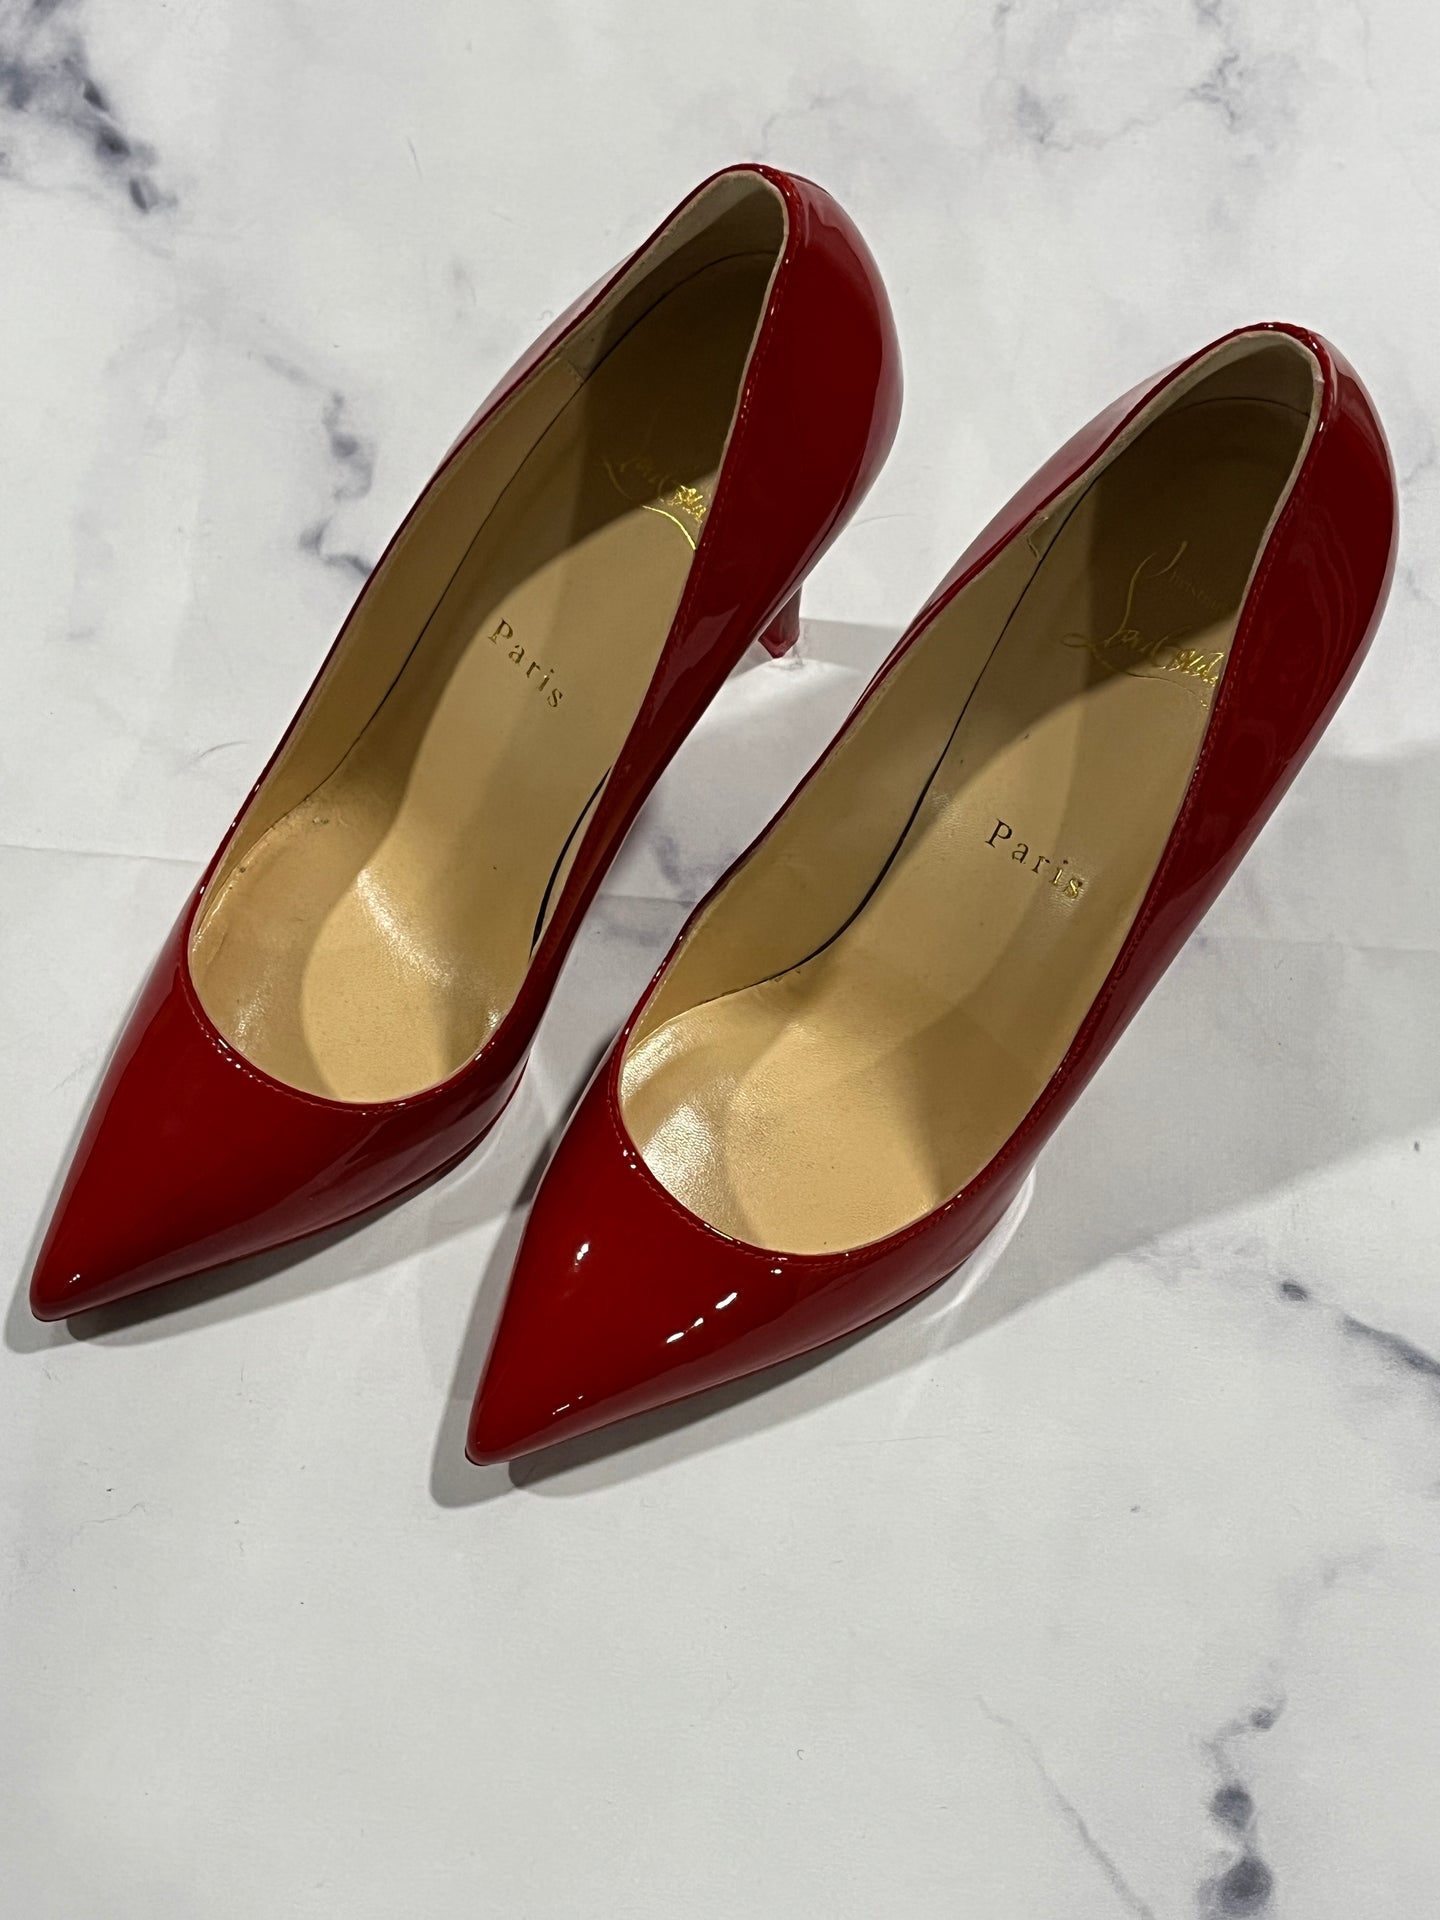 Christian Louboutin Red Leather Patent Pumps